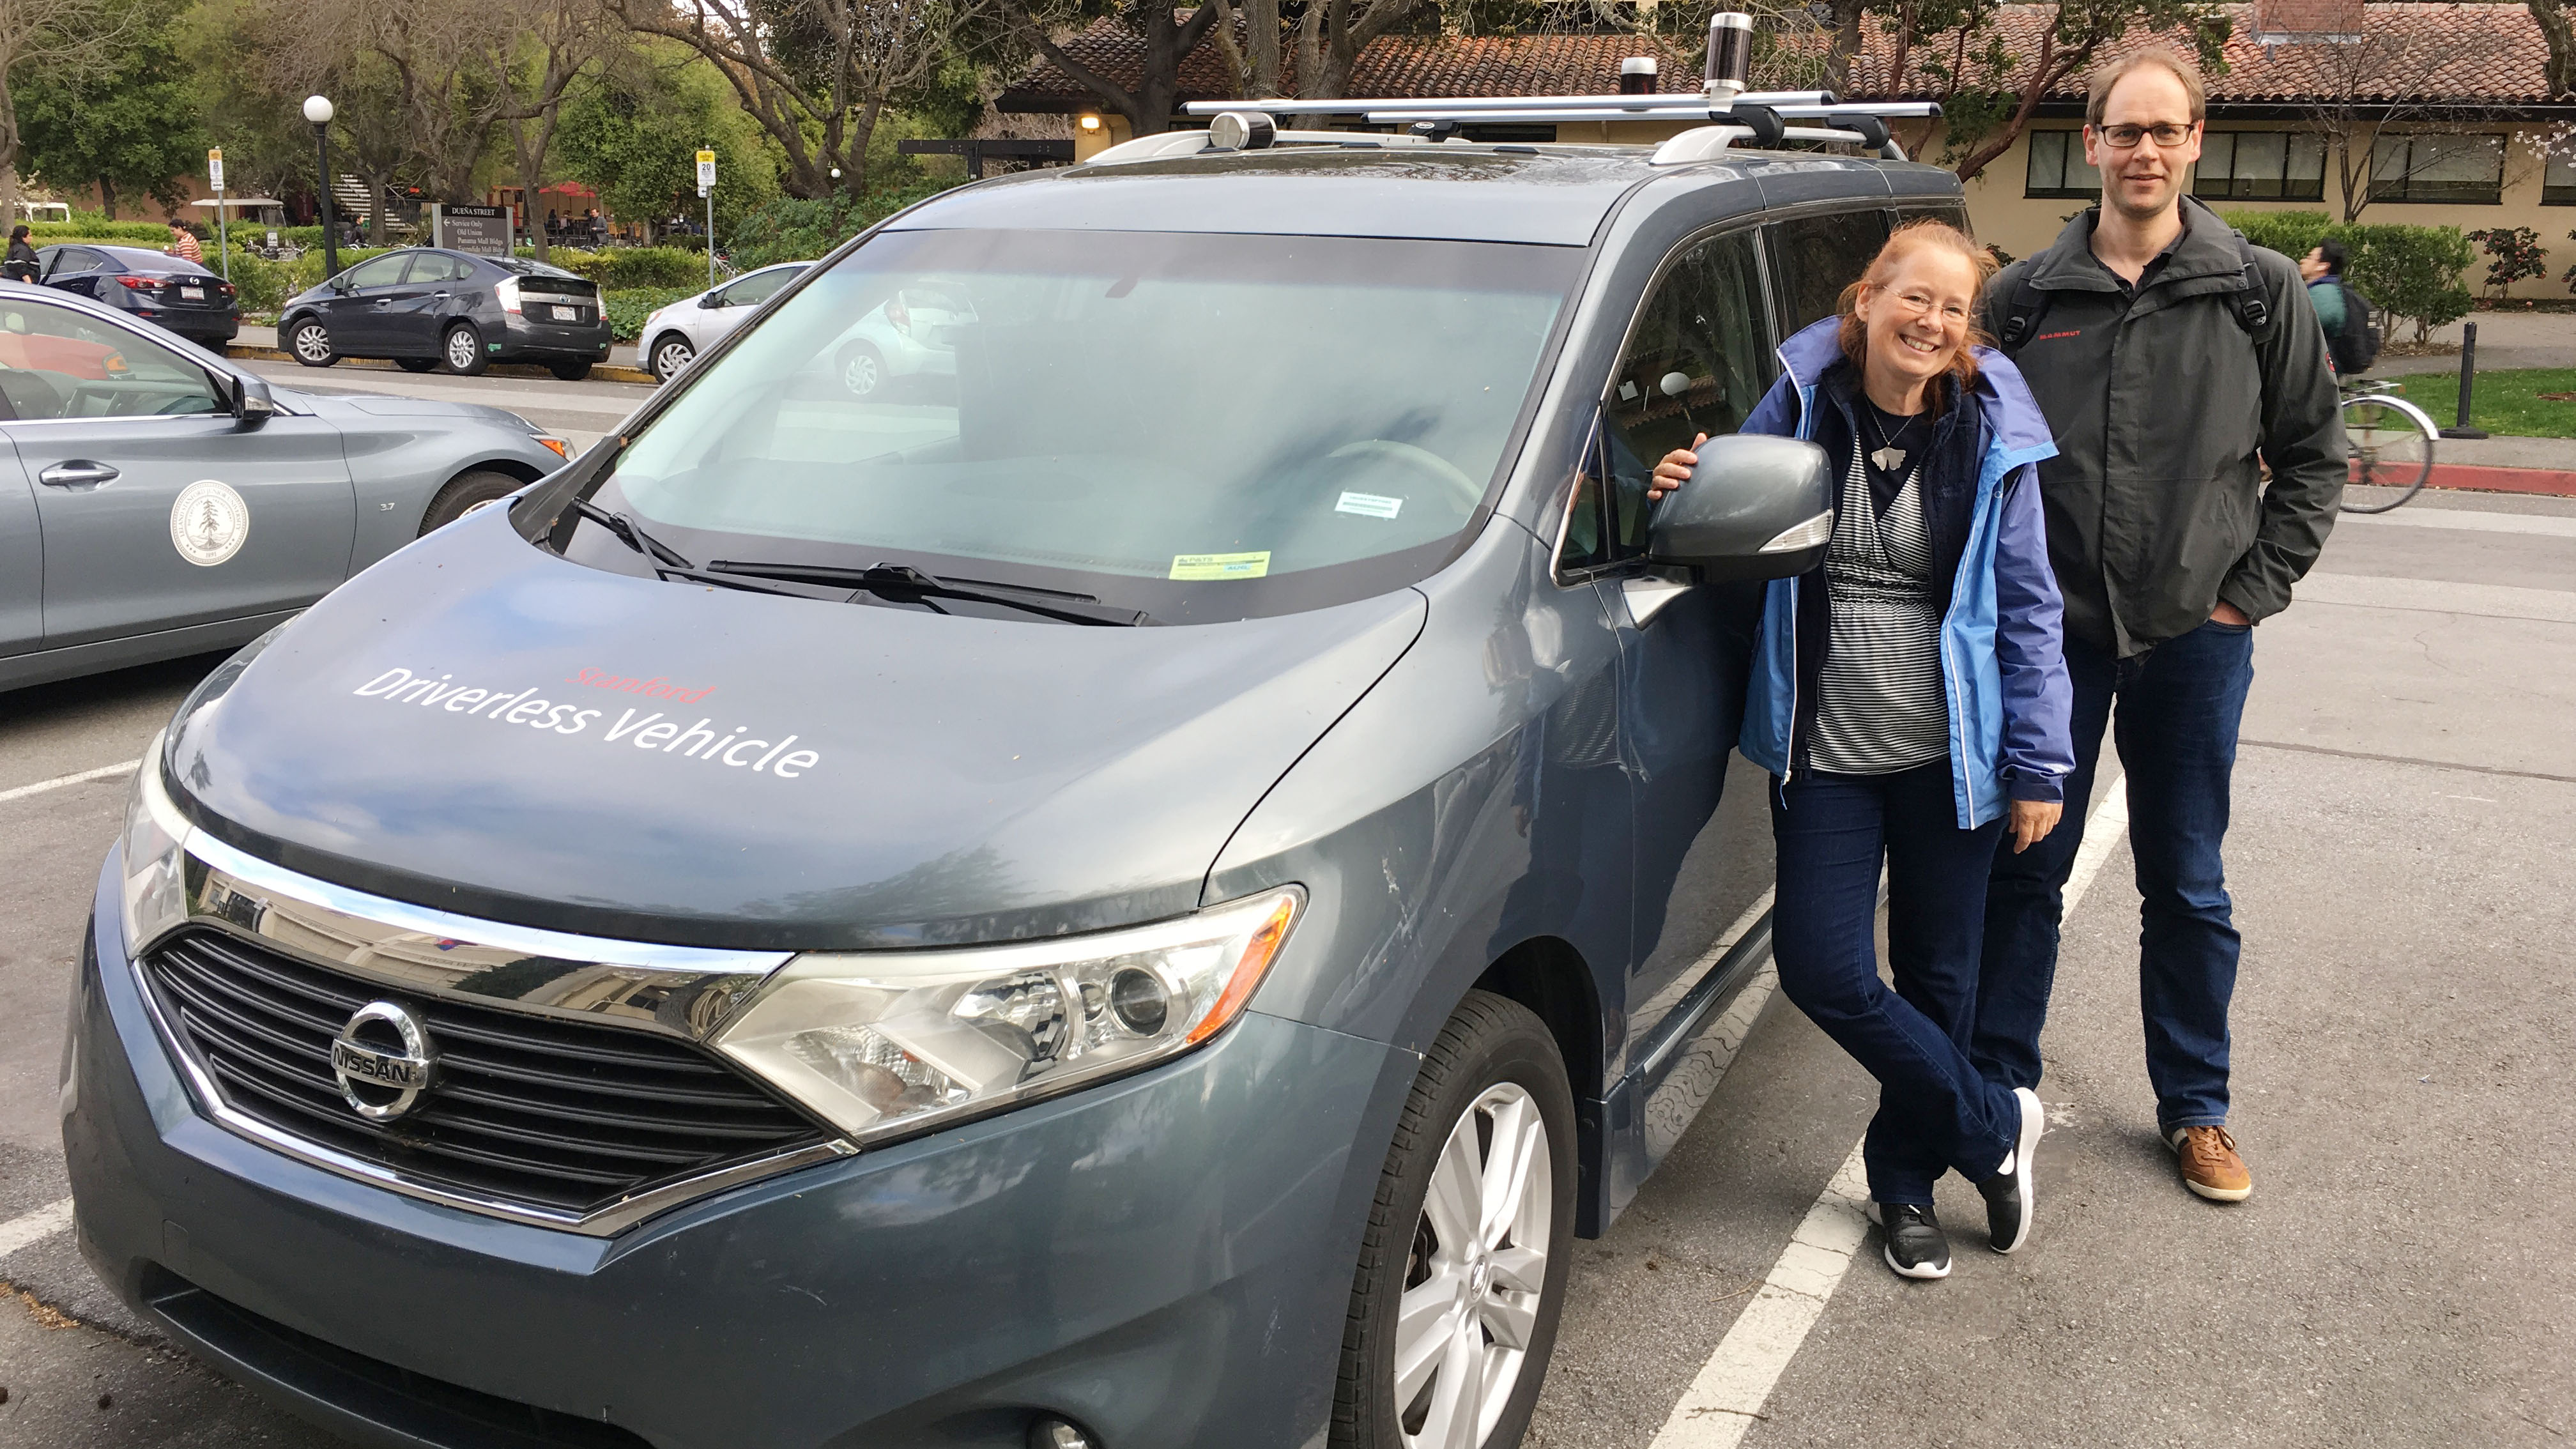 Kerstin Fischer and Kristian Mortensen with one of the ‘Stanford Autonomous Cars’ on Stanford Campus